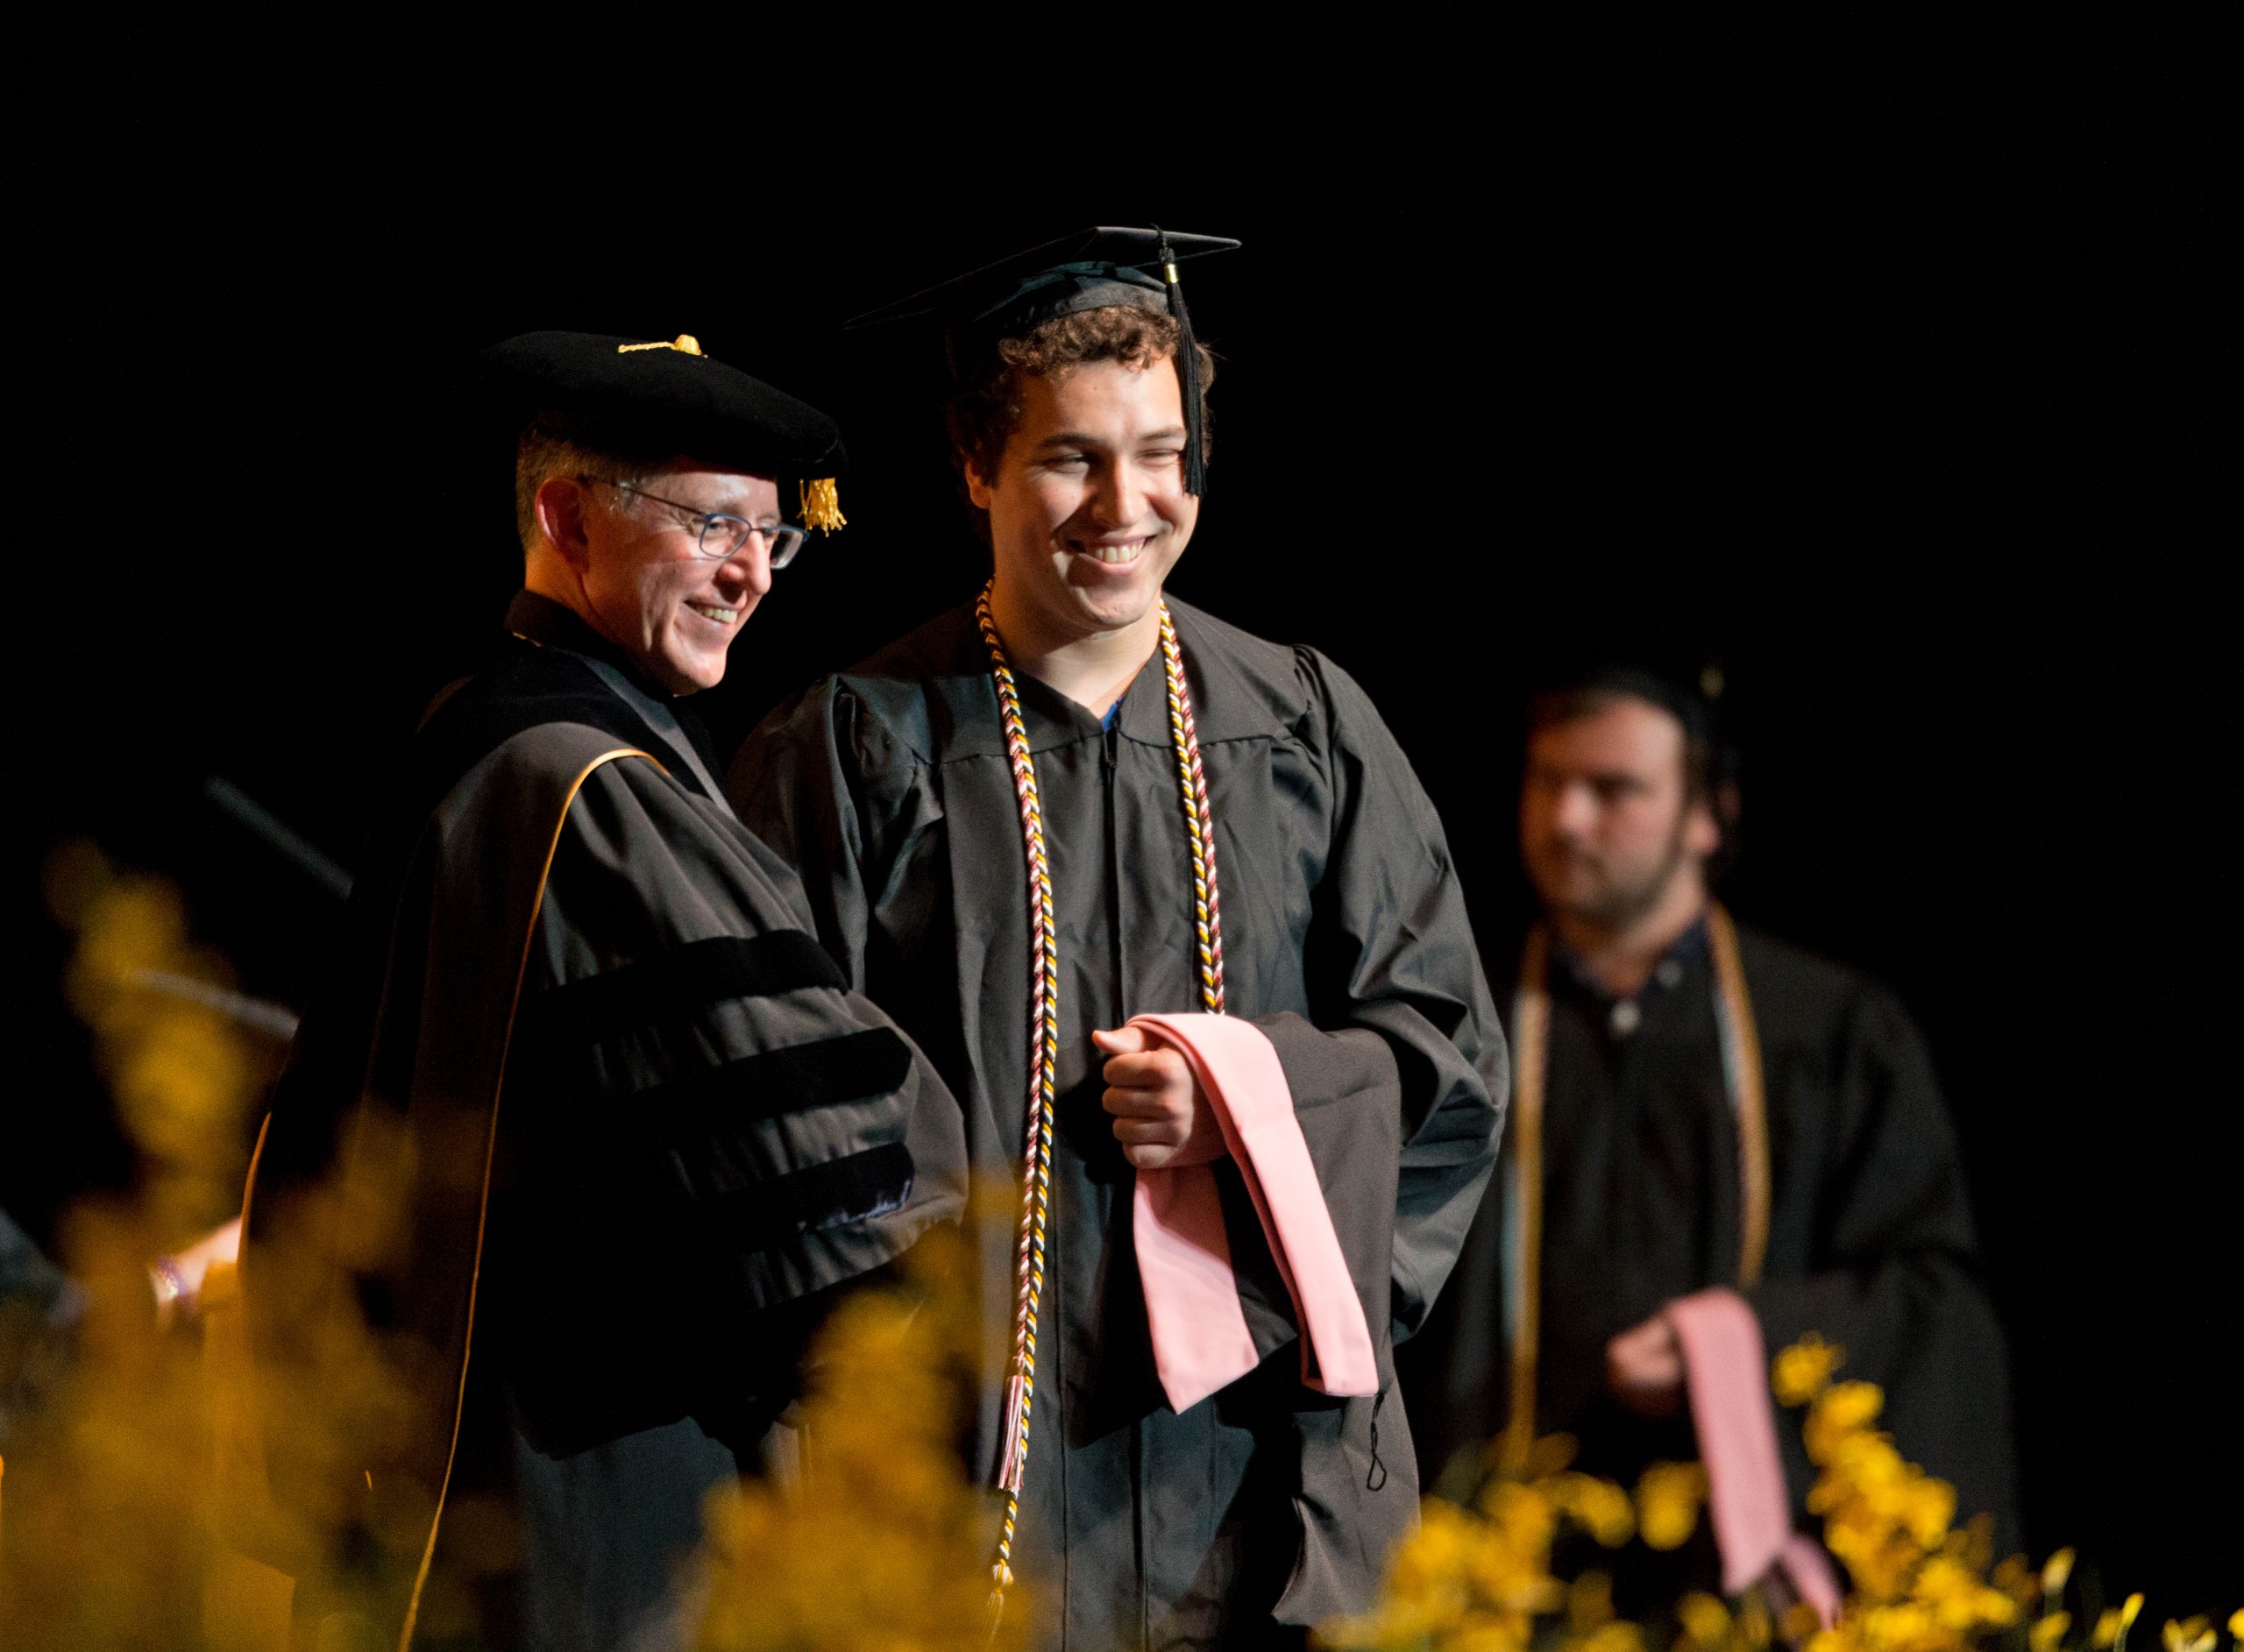 PLU President Thomas W. Krise greets a new graduate on stage at PLU's 2015 Commencement ceremony.